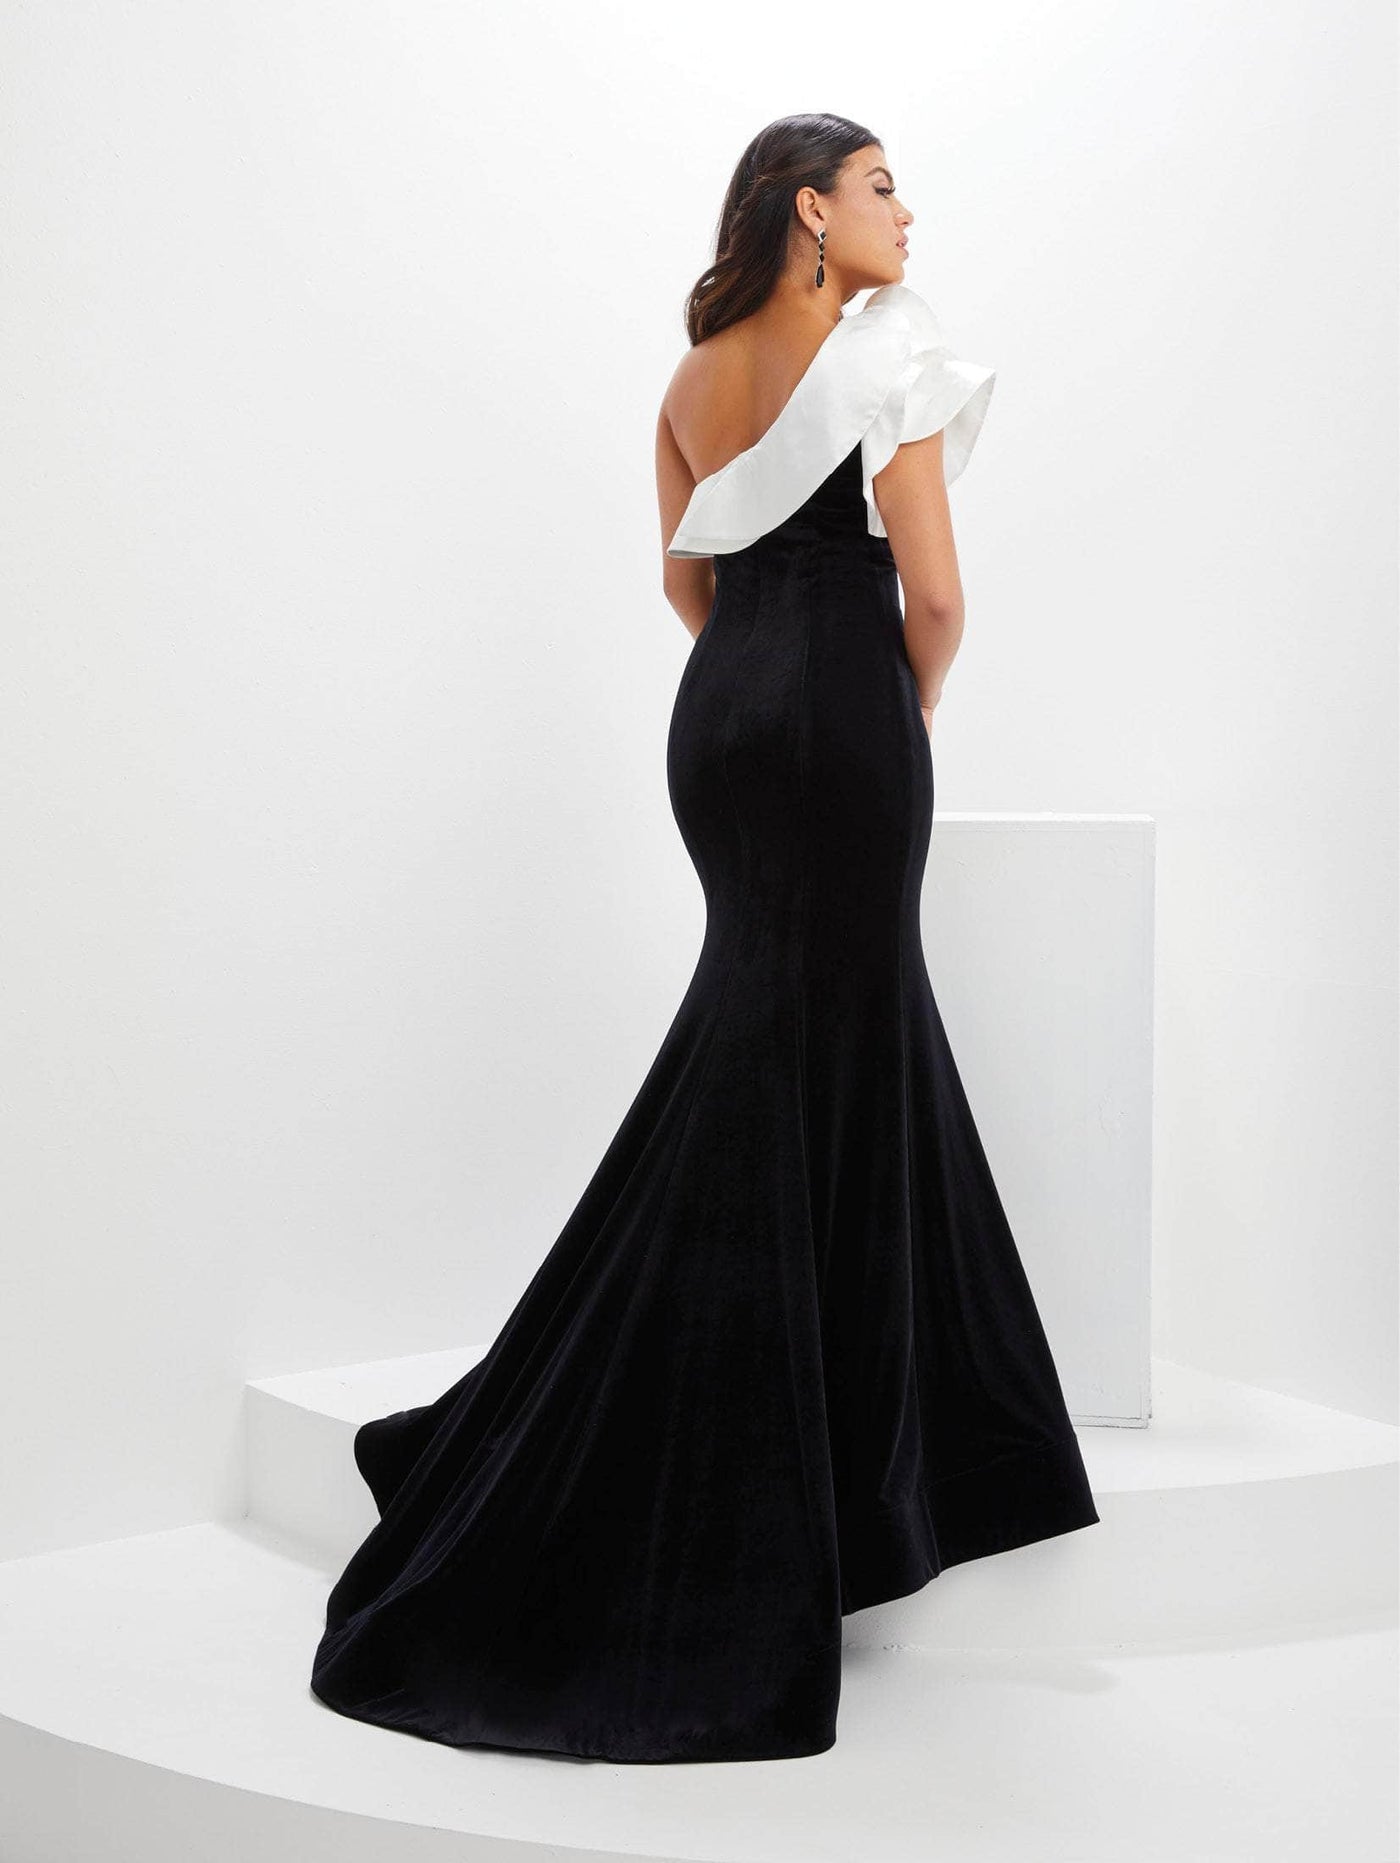 Panoply 14130 - Rosette One Shoulder Evening Gown Special Occasion Dress